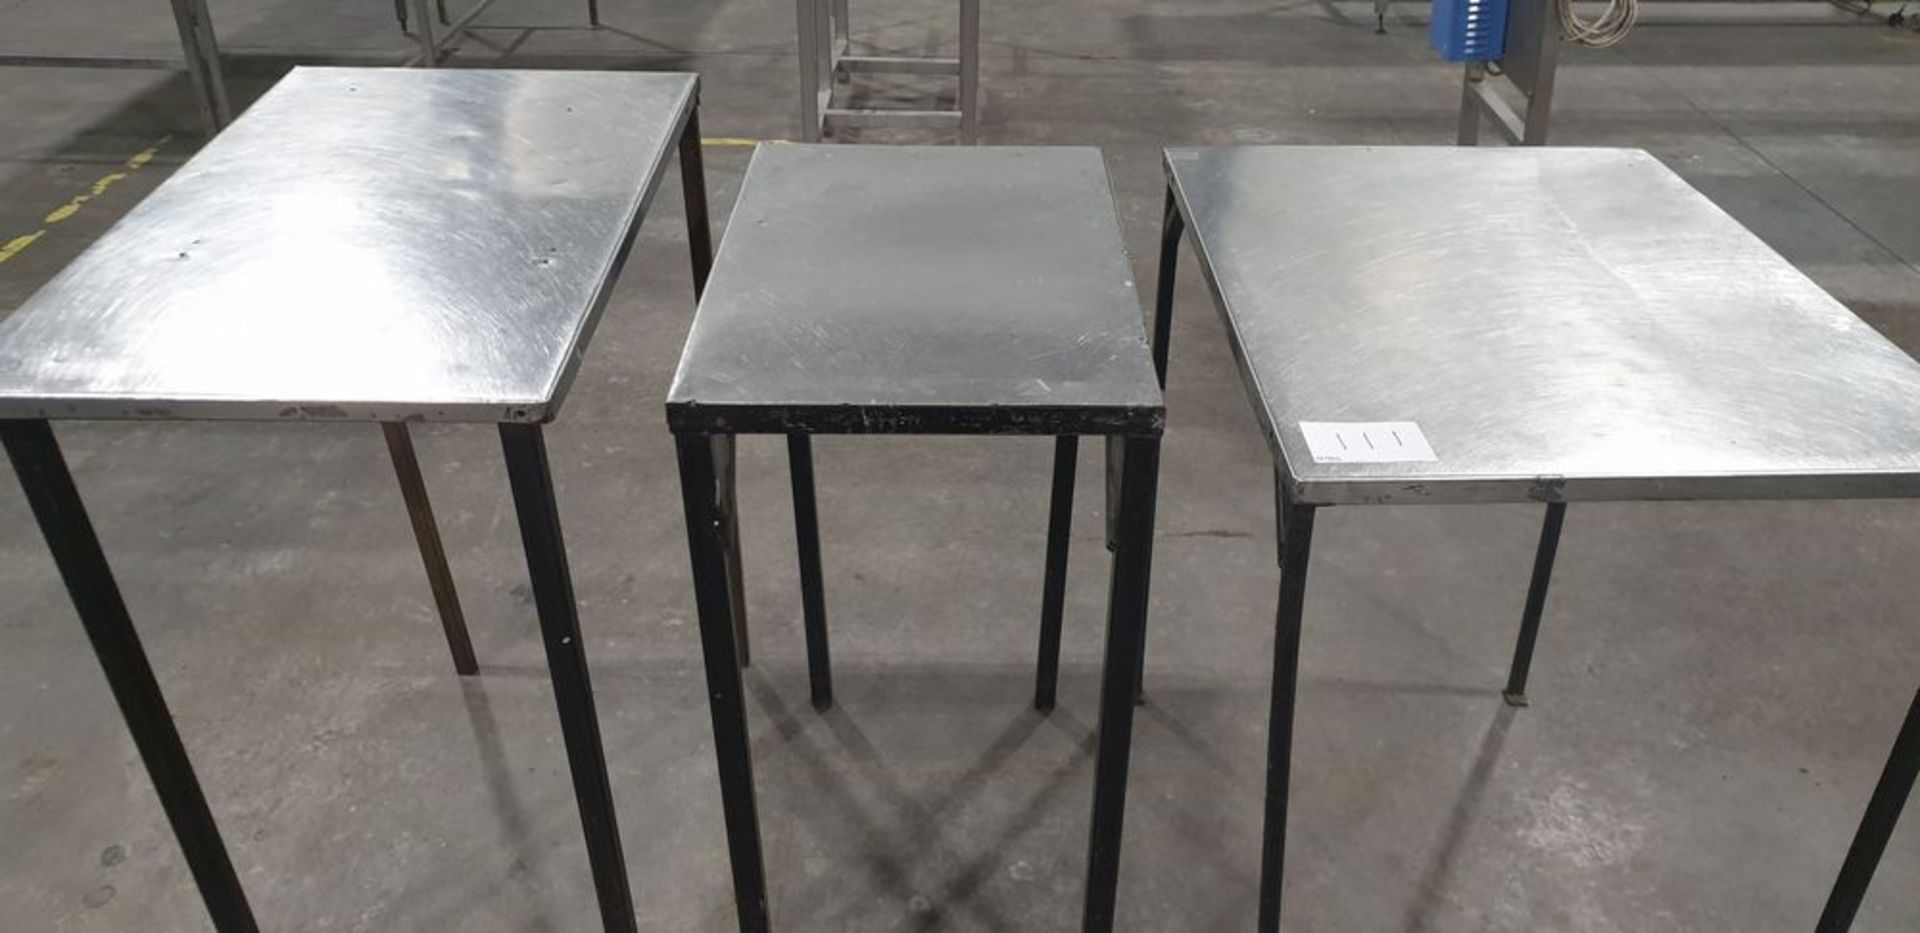 3 : Stainless Steel Prep Tables